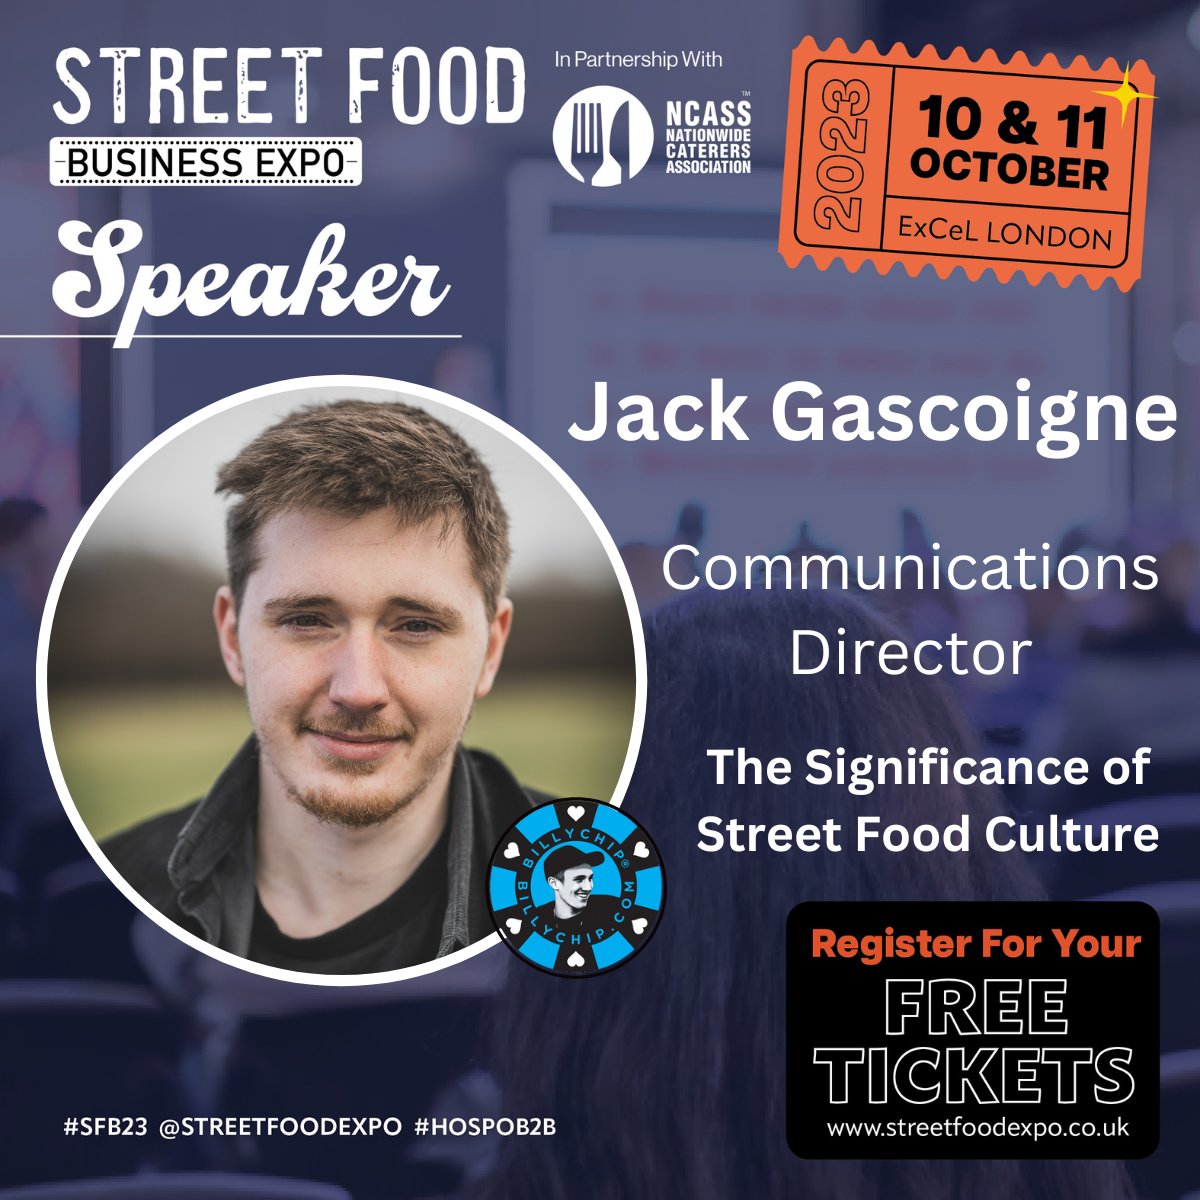 Joining our panel: 'The Significance of Street Food Culture' is Jack Gascoigne, Communications Director at @thebillychip!

Get your tickets to attend The ExCeL London on 10th & 11th October here >>> bitly.ws/TEGz they are limited, so be quick! 🎟

#SFBE23 #HOSPOB2B